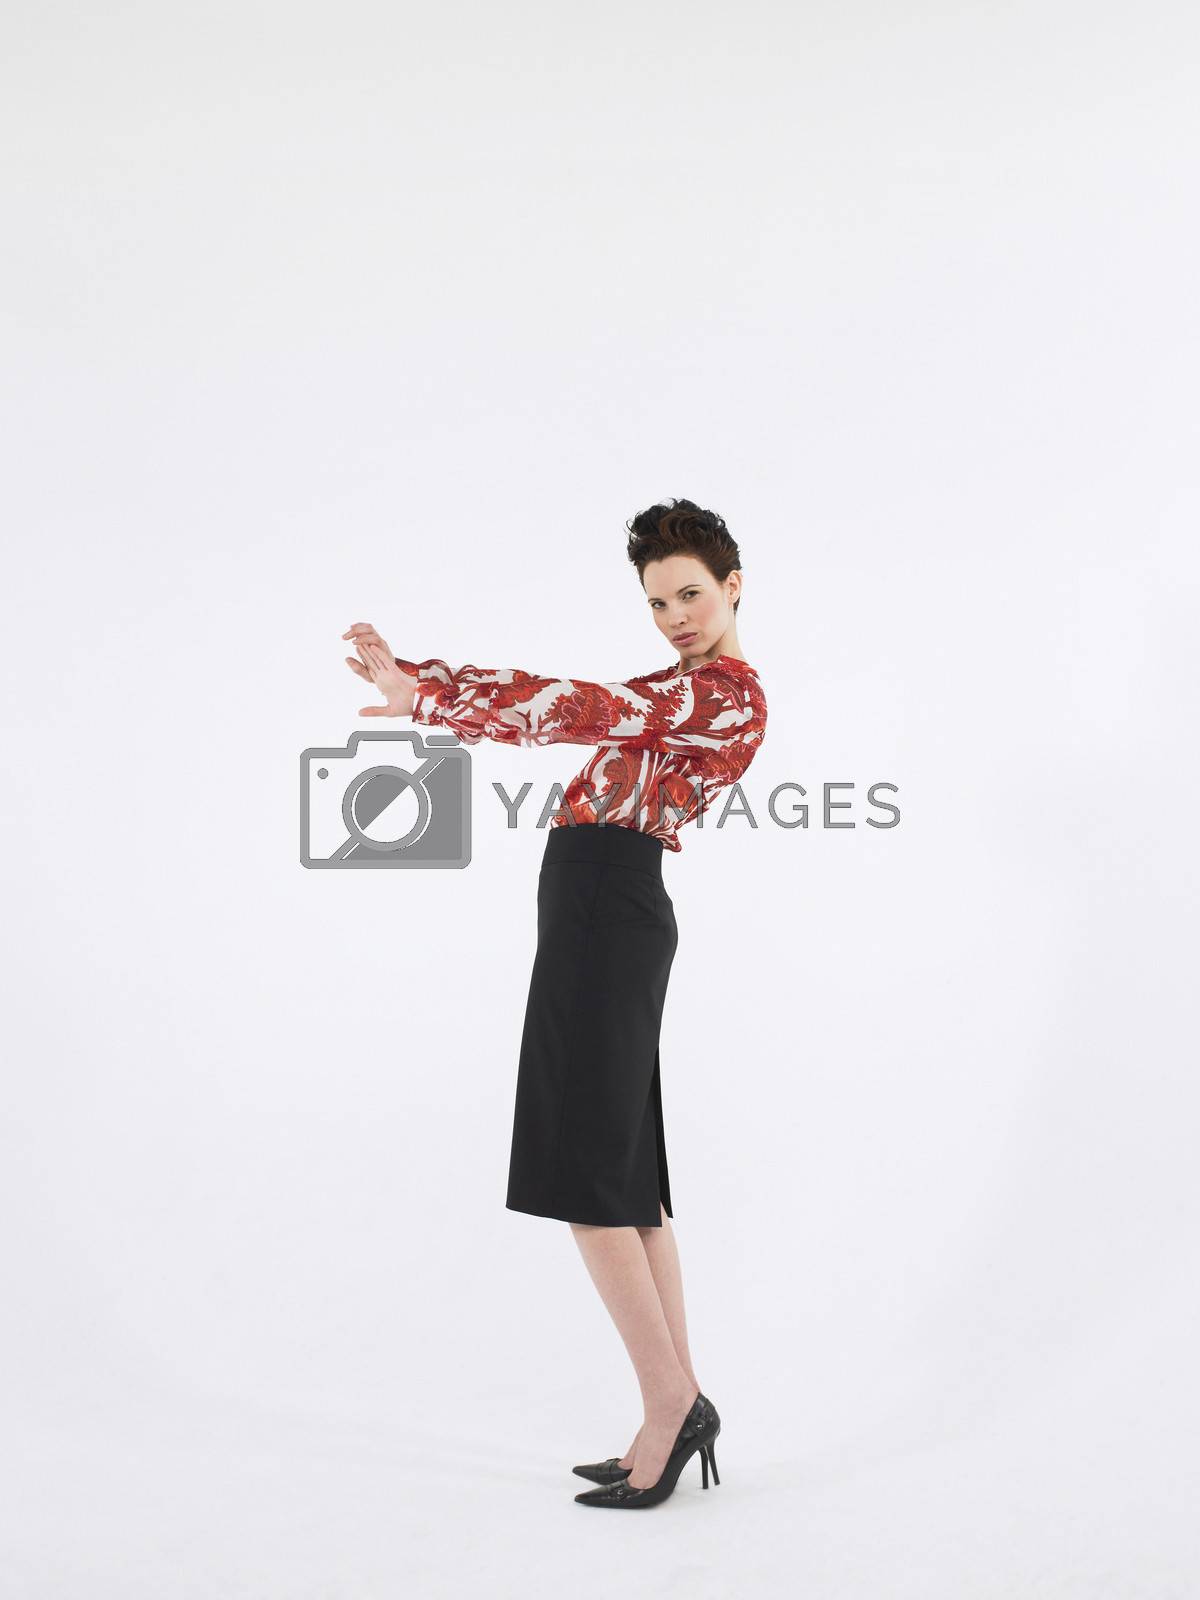 Royalty free image of Full length side view of a young woman with hand gestures posing against white background by moodboard